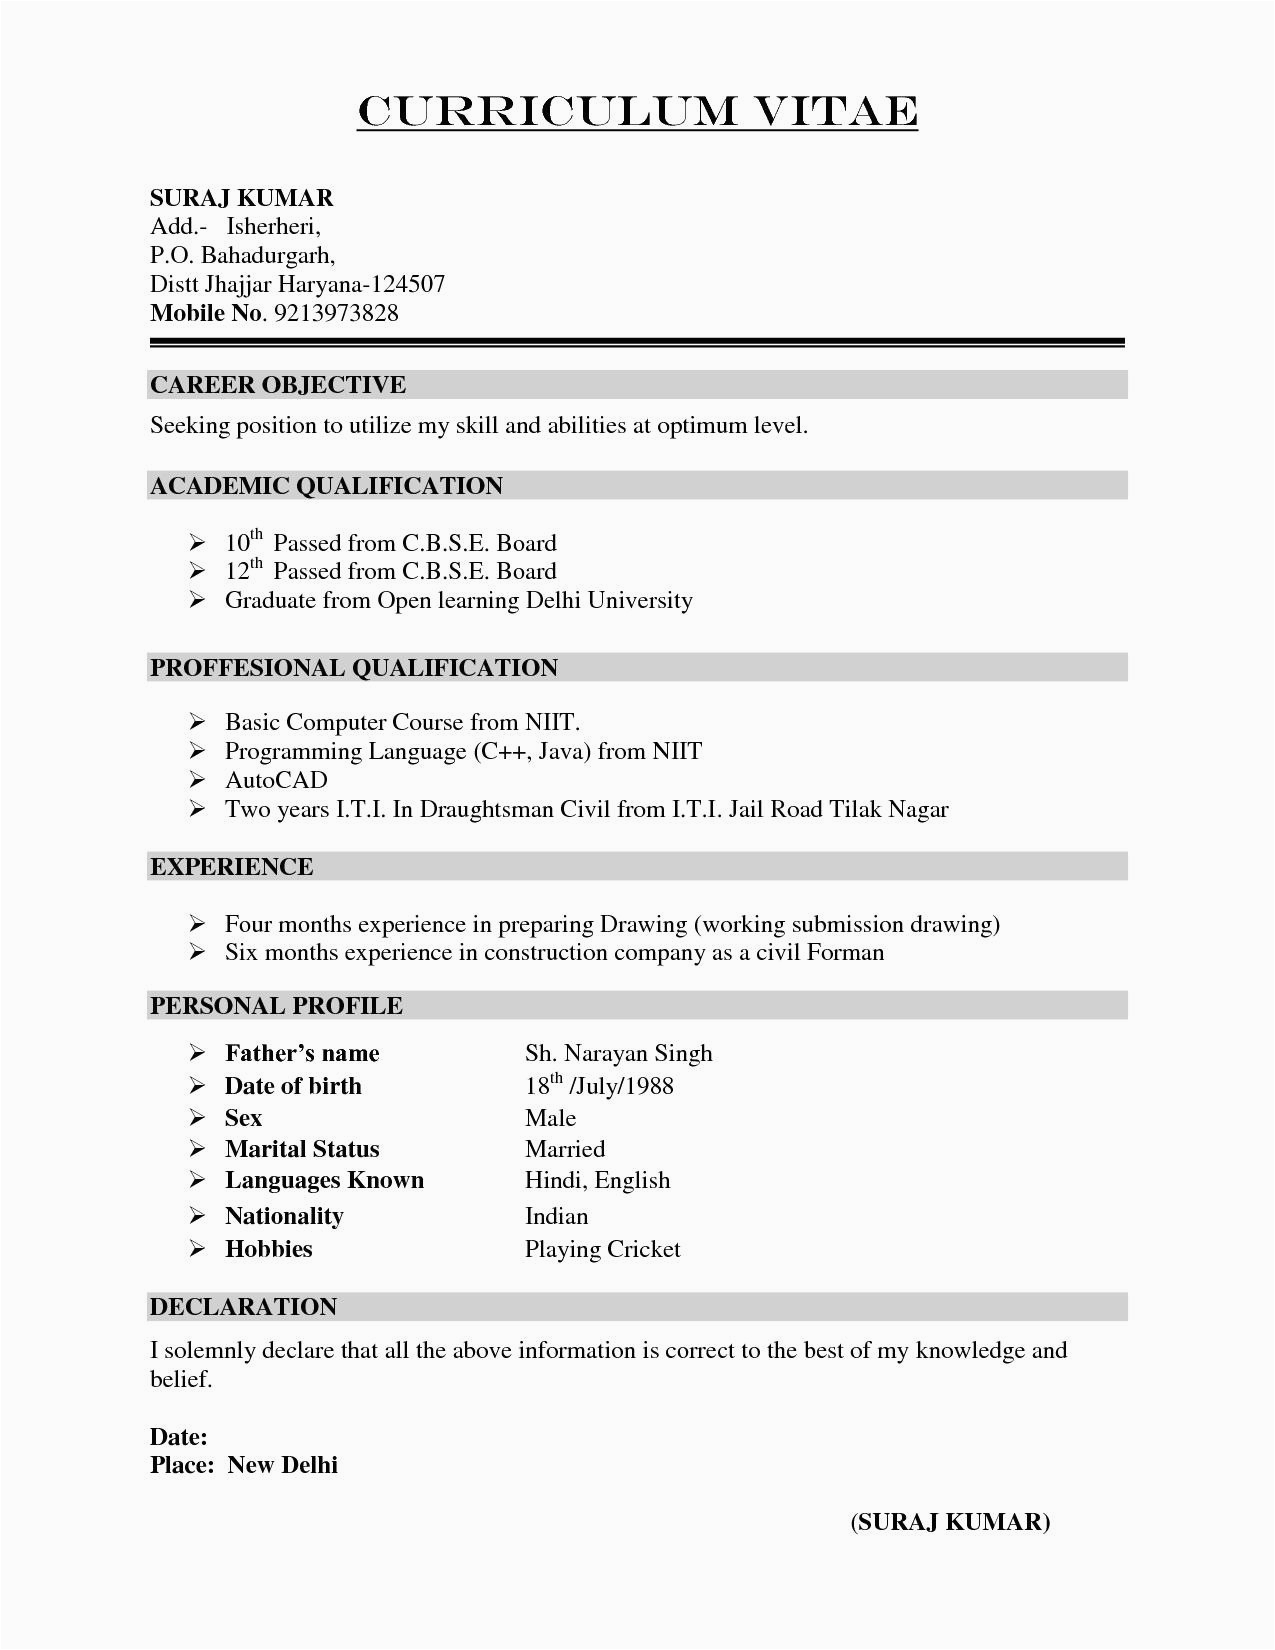 Sample Resume for Cabin Crew Fresher 85 Nice Cabin Crew Resume Fresher with Pics